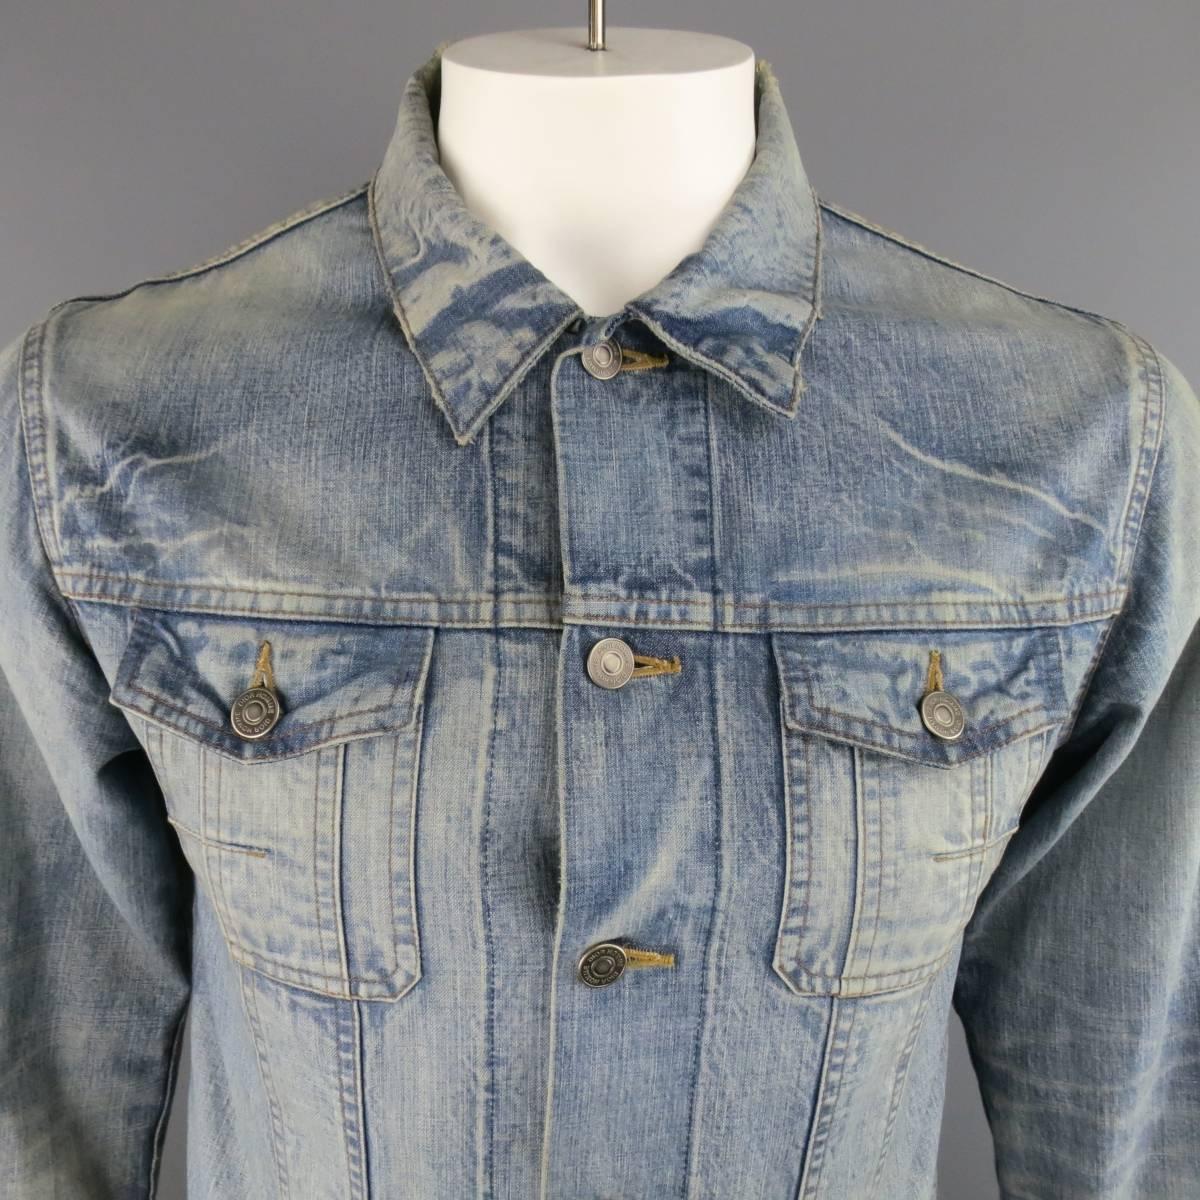 DIOR HOMME by Hedi Slimane shrunken trucker jacket in a light weight acid washed cotton denim with distressed details, silver tone hardware, and signature stitch darts. Made in Japan.
 
Excellent Pre-Owned Condition.
Marked: IT 52
 
Measurements:
